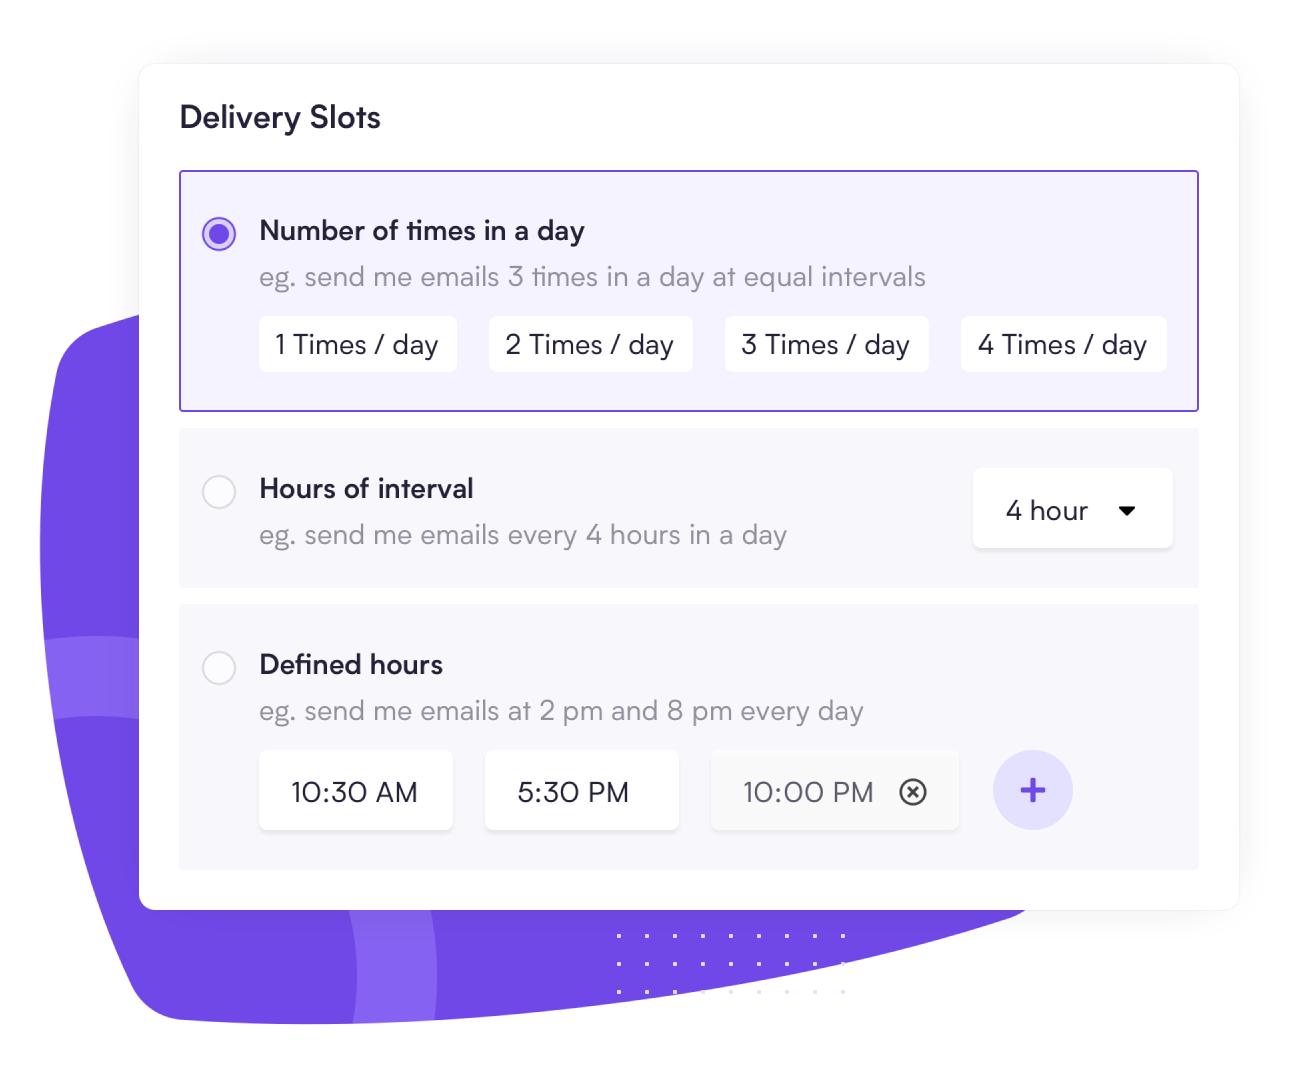 Mailman deliver emails every few hours